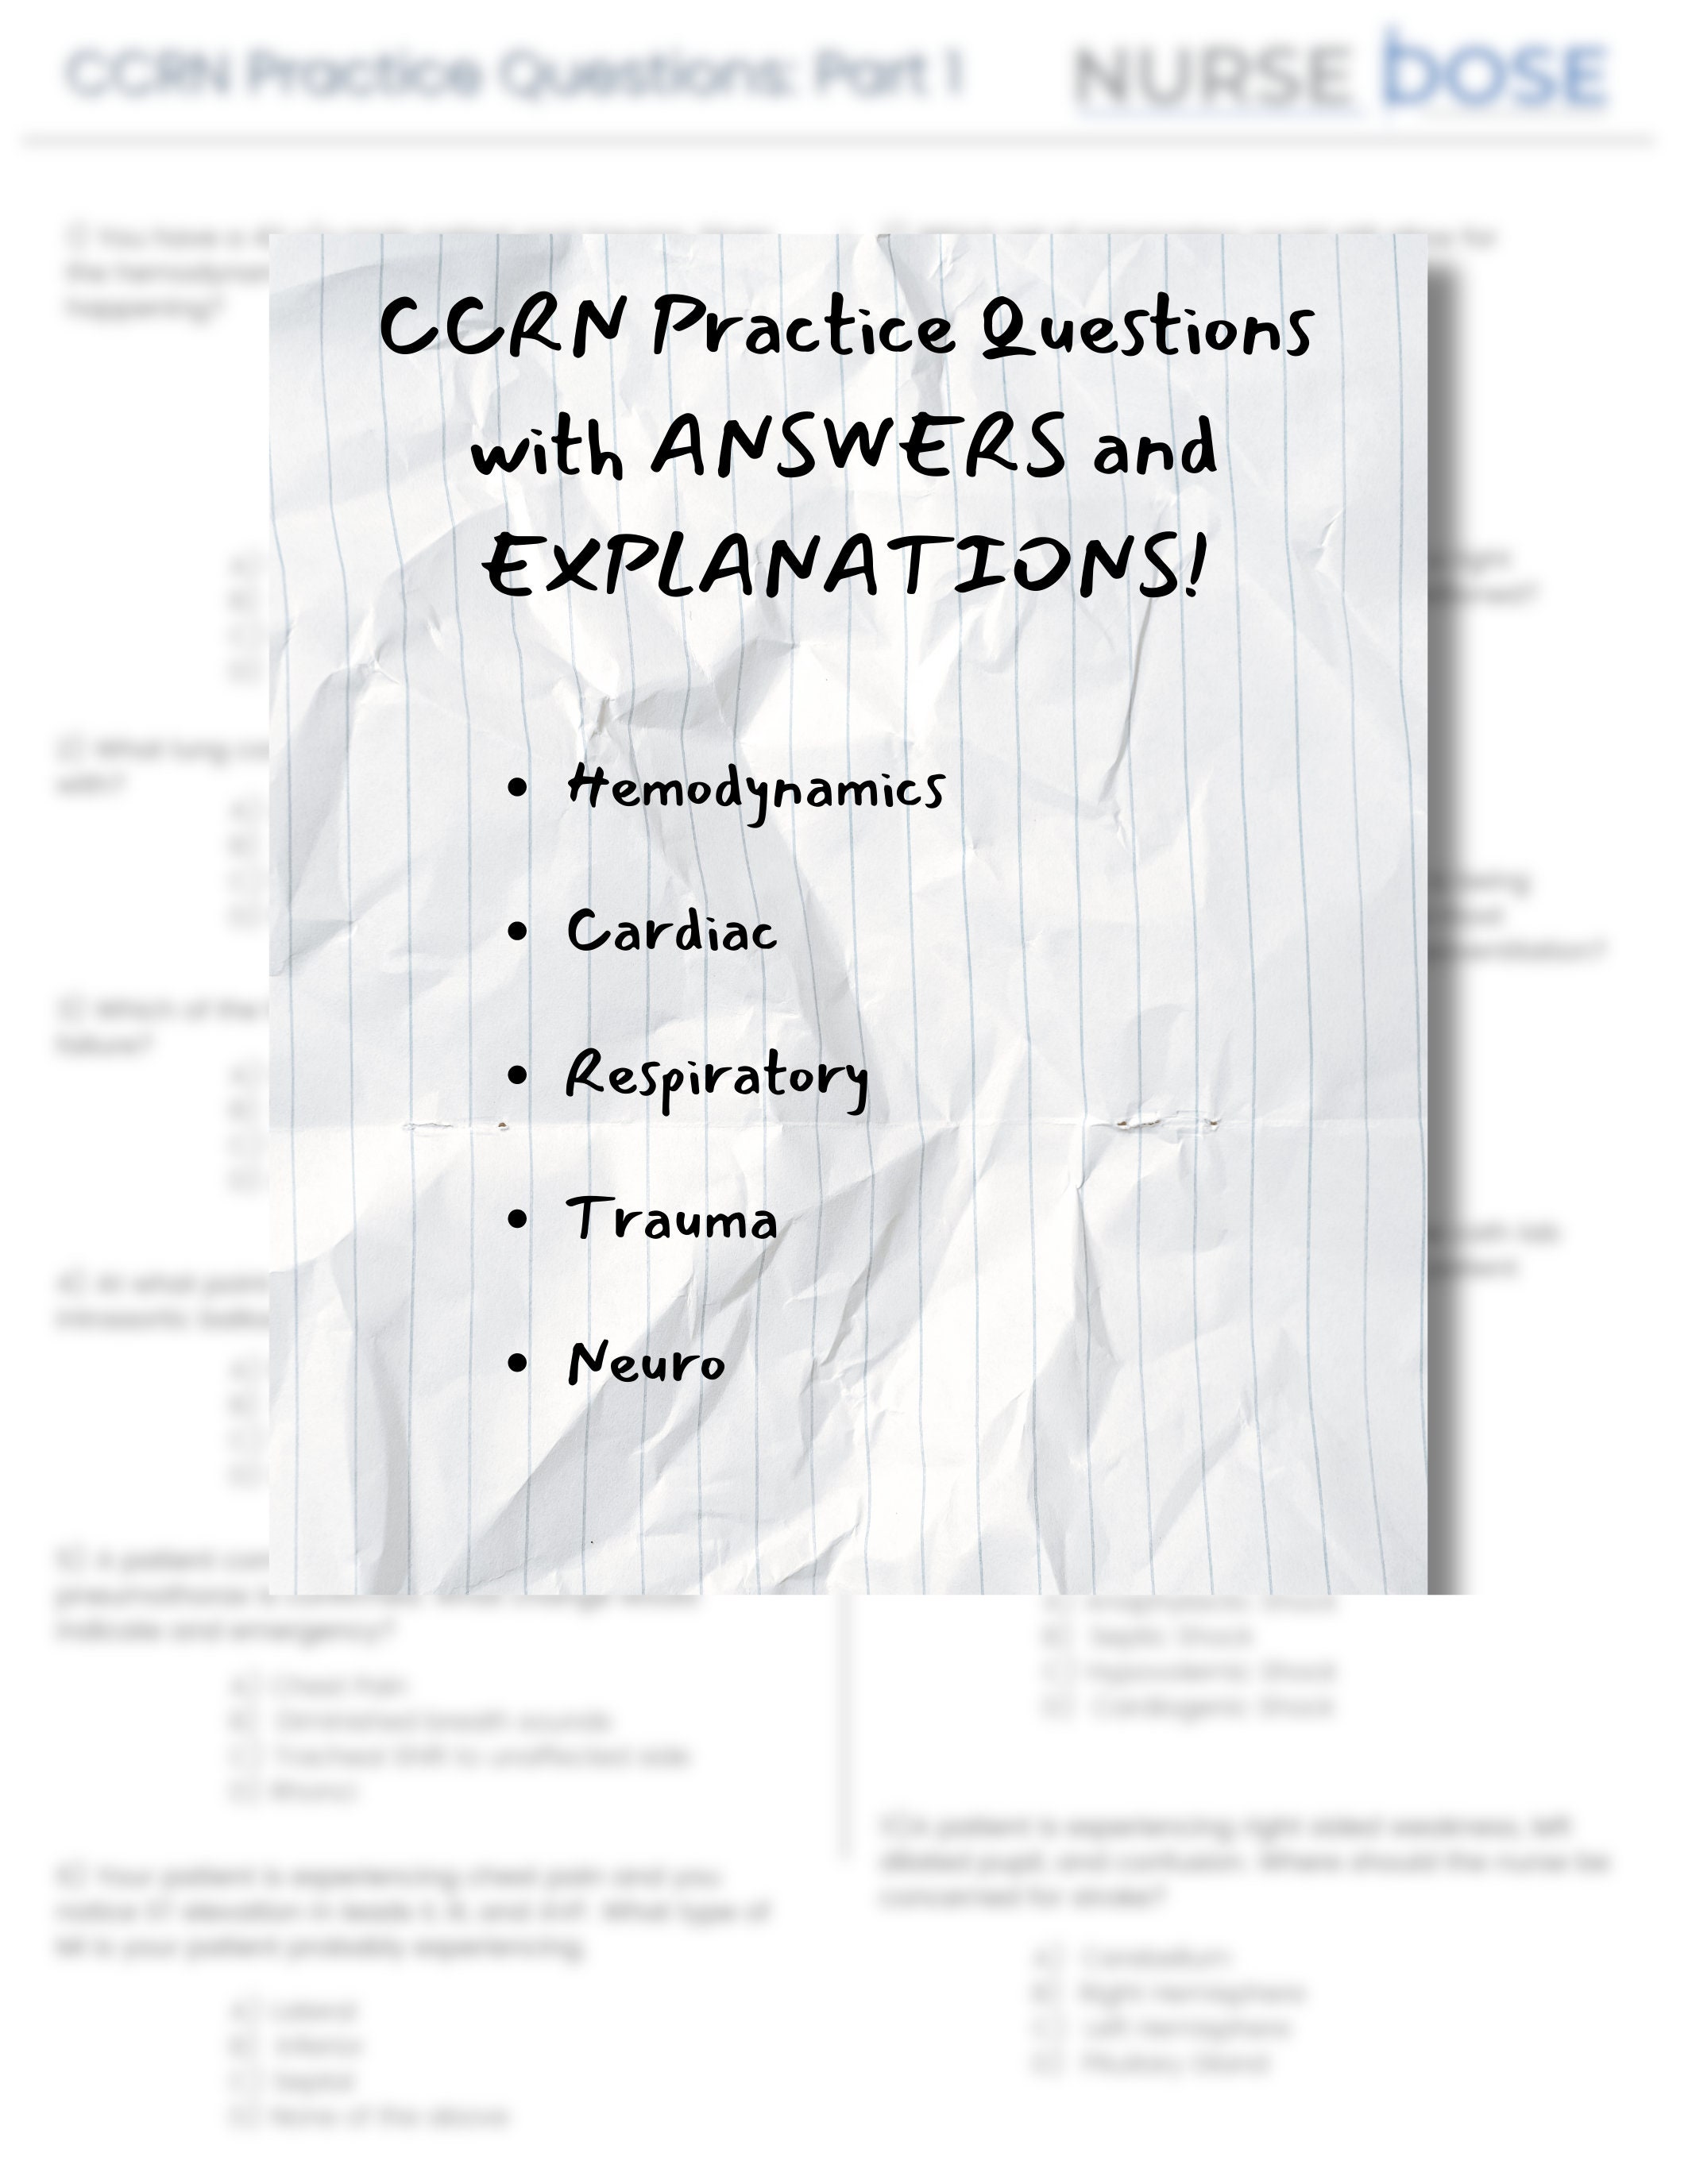 CCRN Review Practice Questions Printable for Critical Care - Etsy